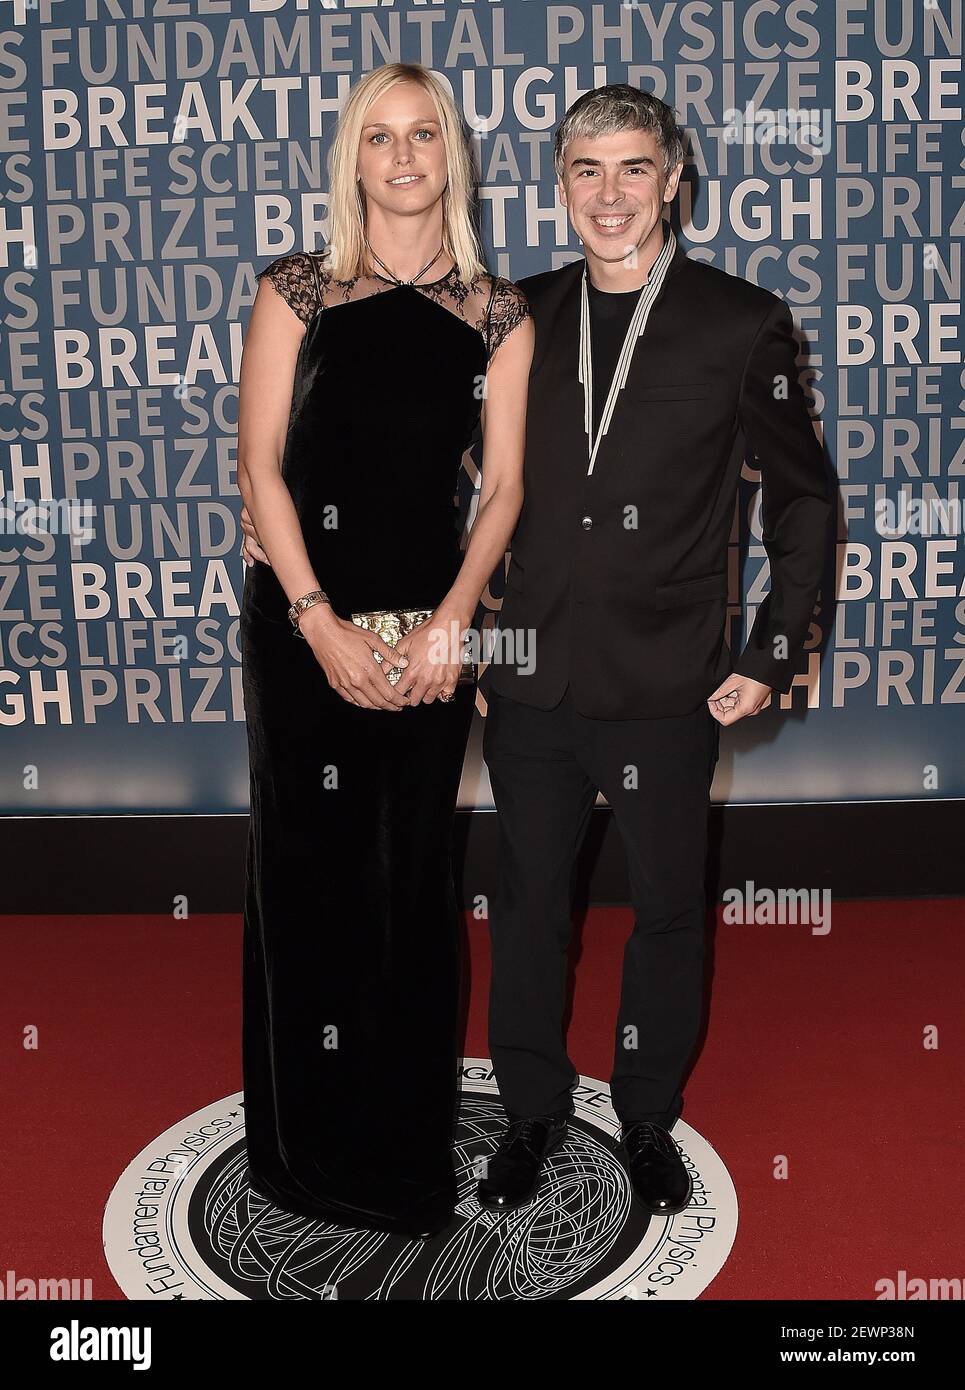 MOUNTAIN VIEW, CA - DECEMBER 4: Google Co-Founder Larry Page and wife Lucinda Southworth at the 5th Annual Breakthrough Prize at NASA Ames Research Center on December 4, 2016 in Mountain View, California. (Photo by Scott Kirkland/PictureGroup) *** Please Use Credit from Credit Field *** Stock Photo